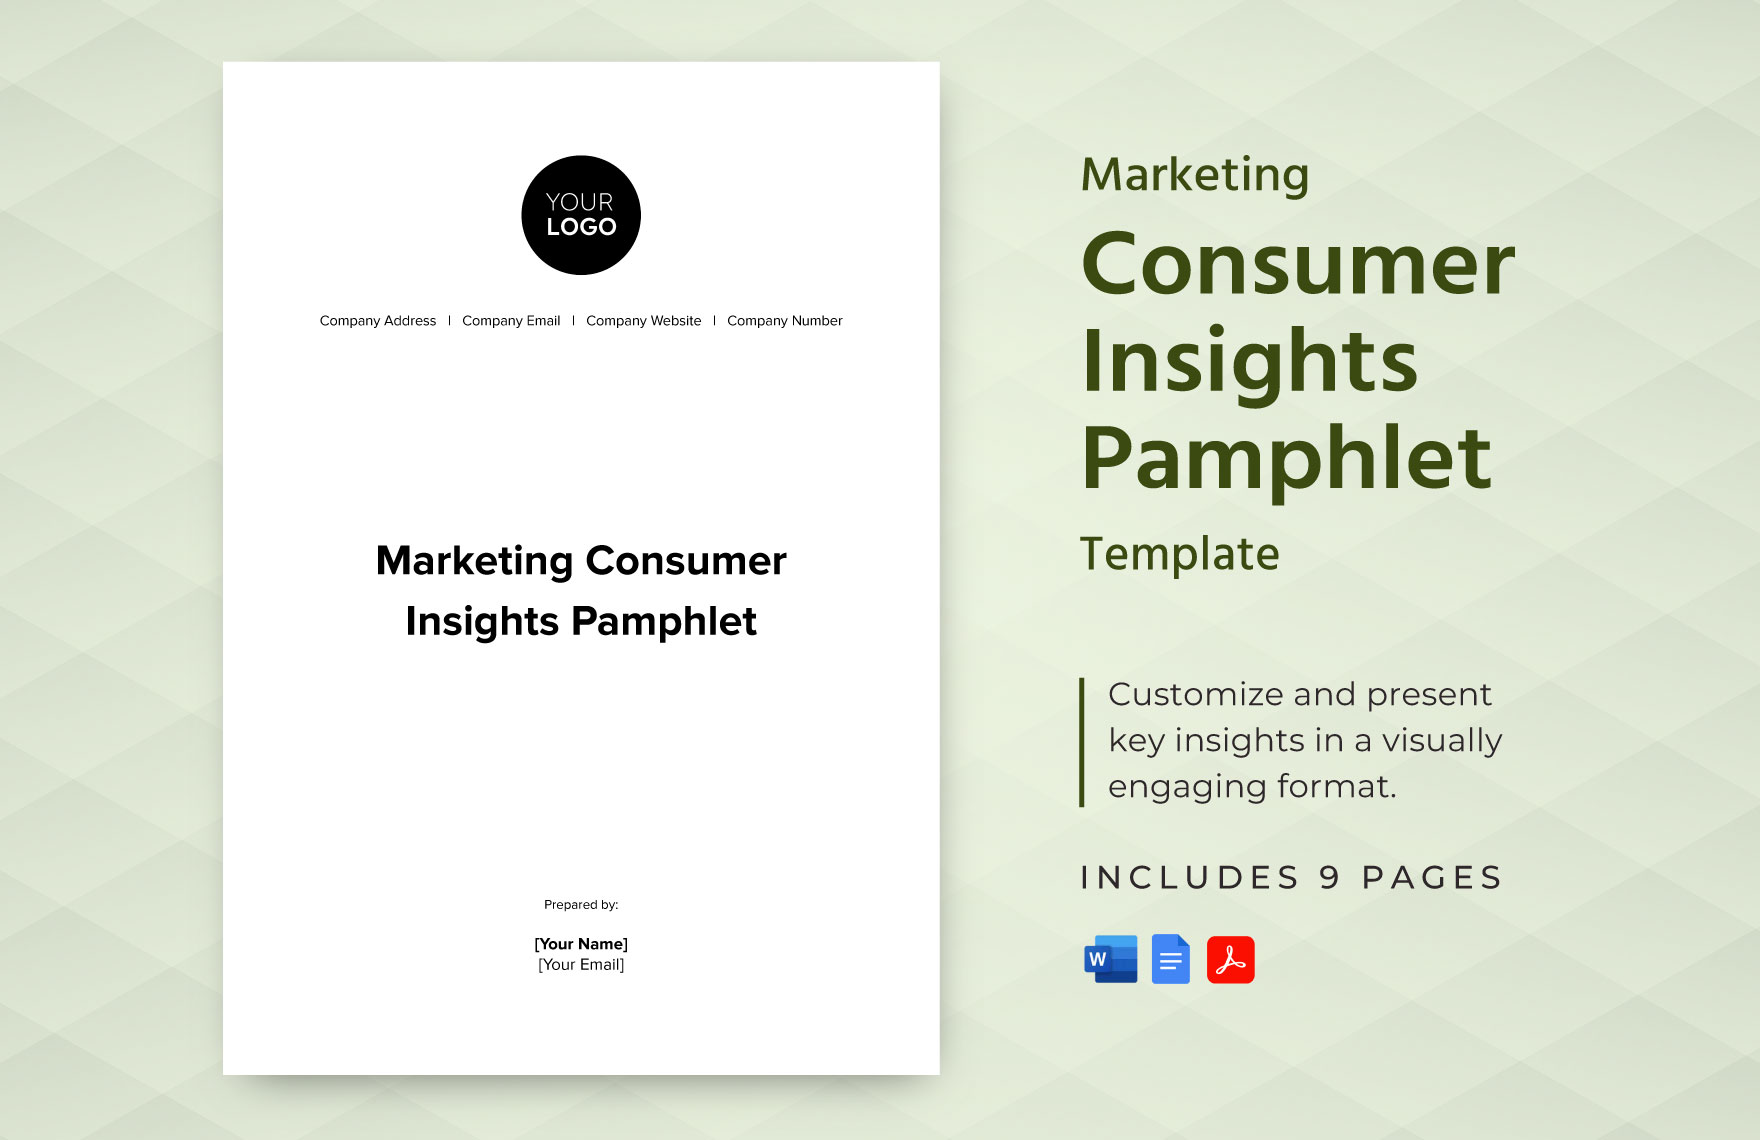 Marketing Consumer Insights Pamphlet Template in Word, Google Docs, PDF